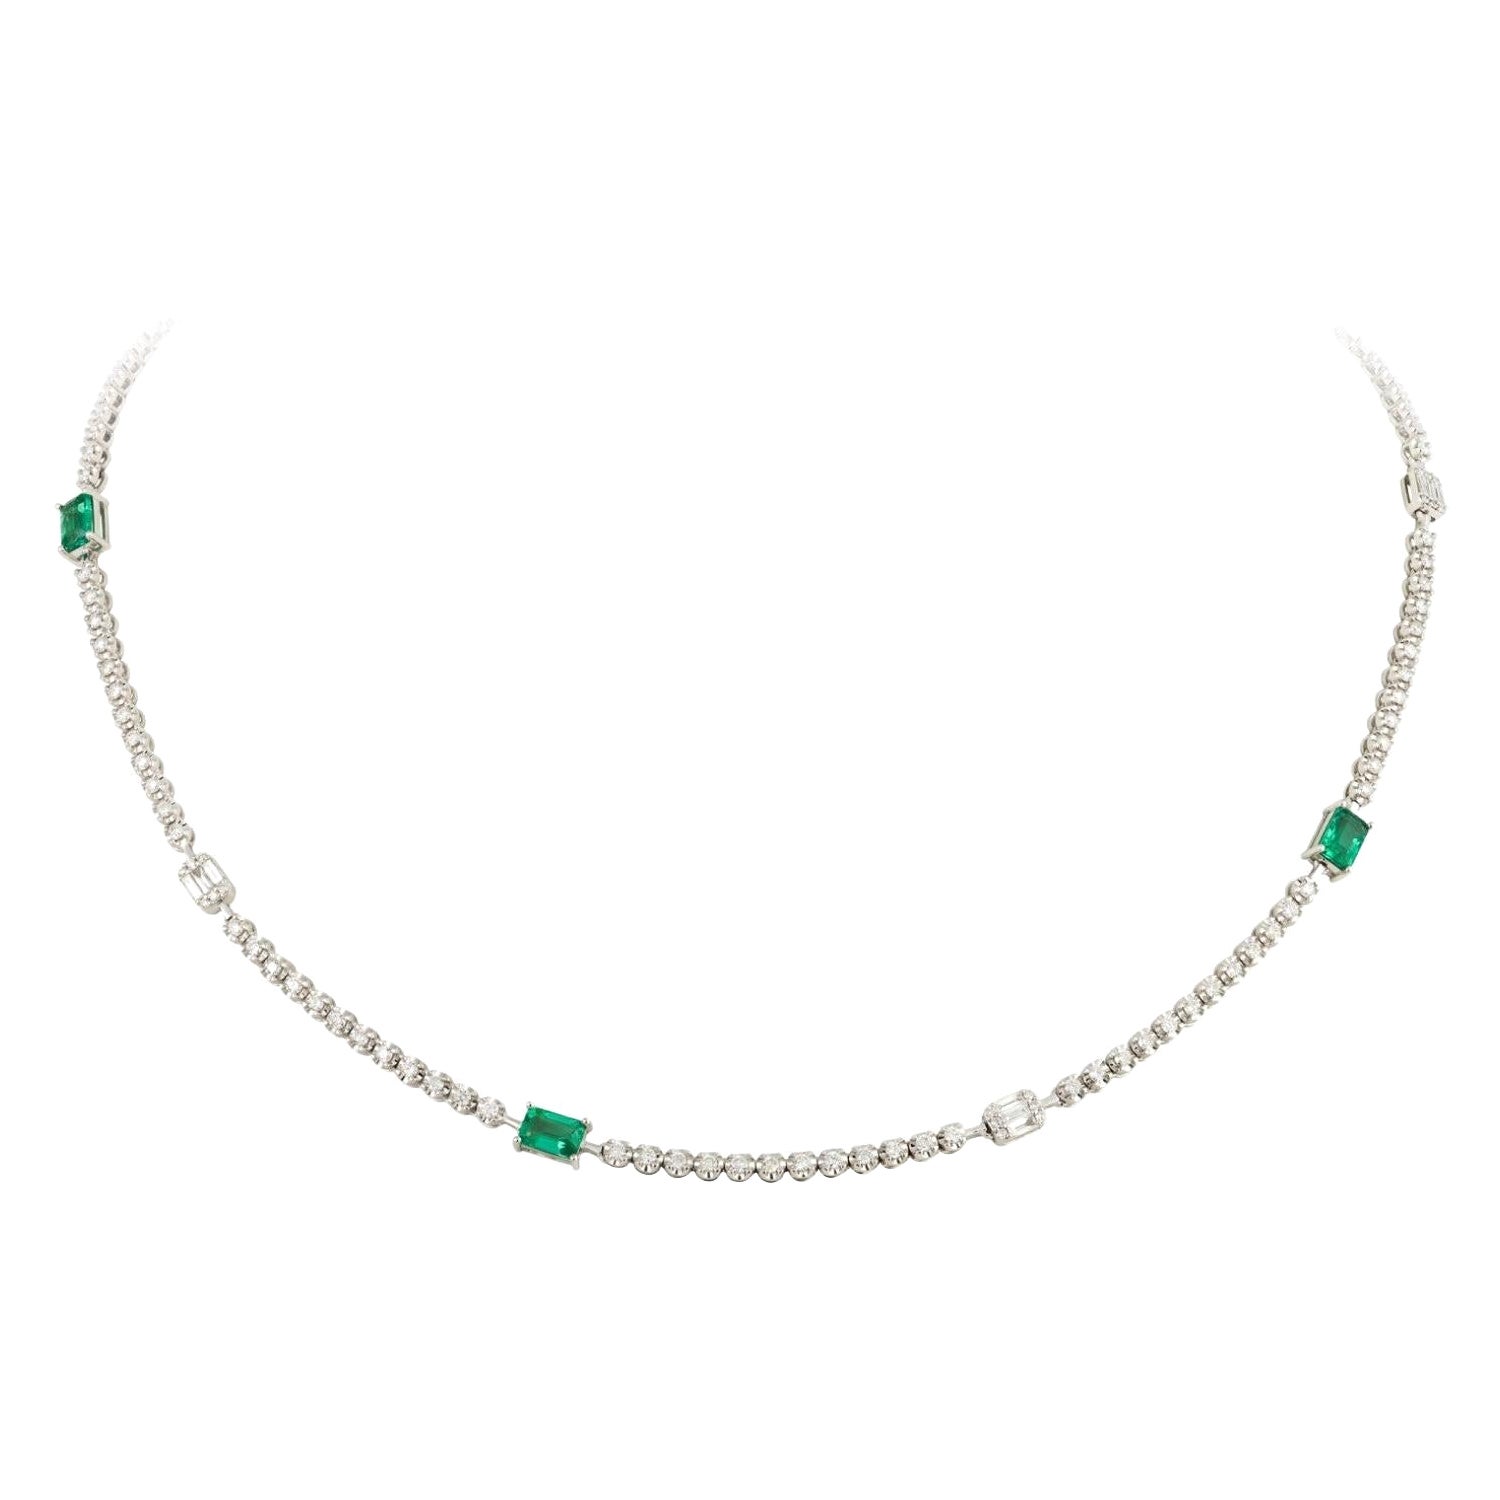 NWT $15, 000 Rare Gorgeous 18KT Gold Fancy Baguette Diamond and Emerald Necklace For Sale